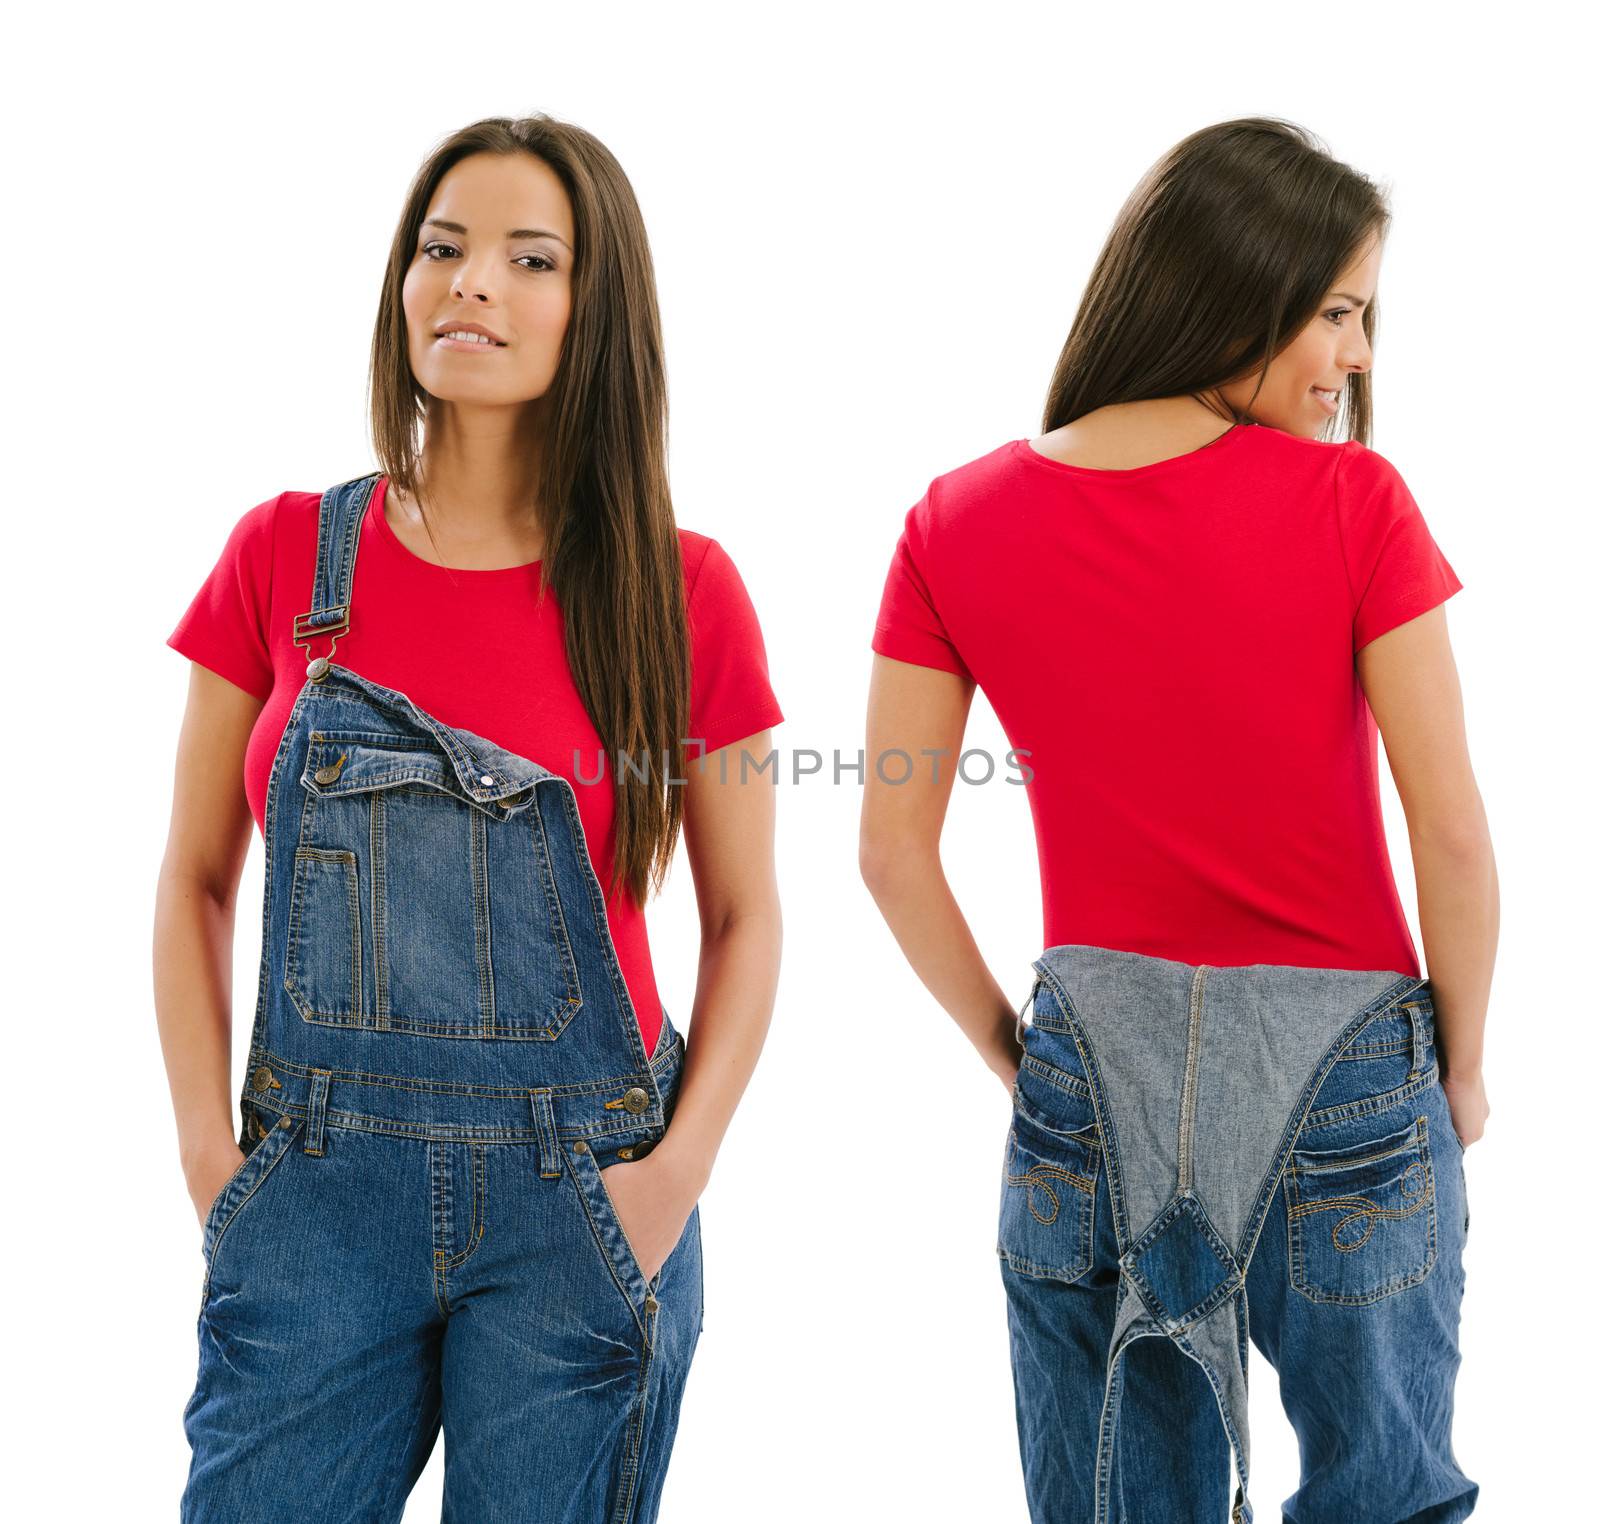 Young beautiful sexy female with blank red shirt and overalls, front and back. Ready for your design or artwork.